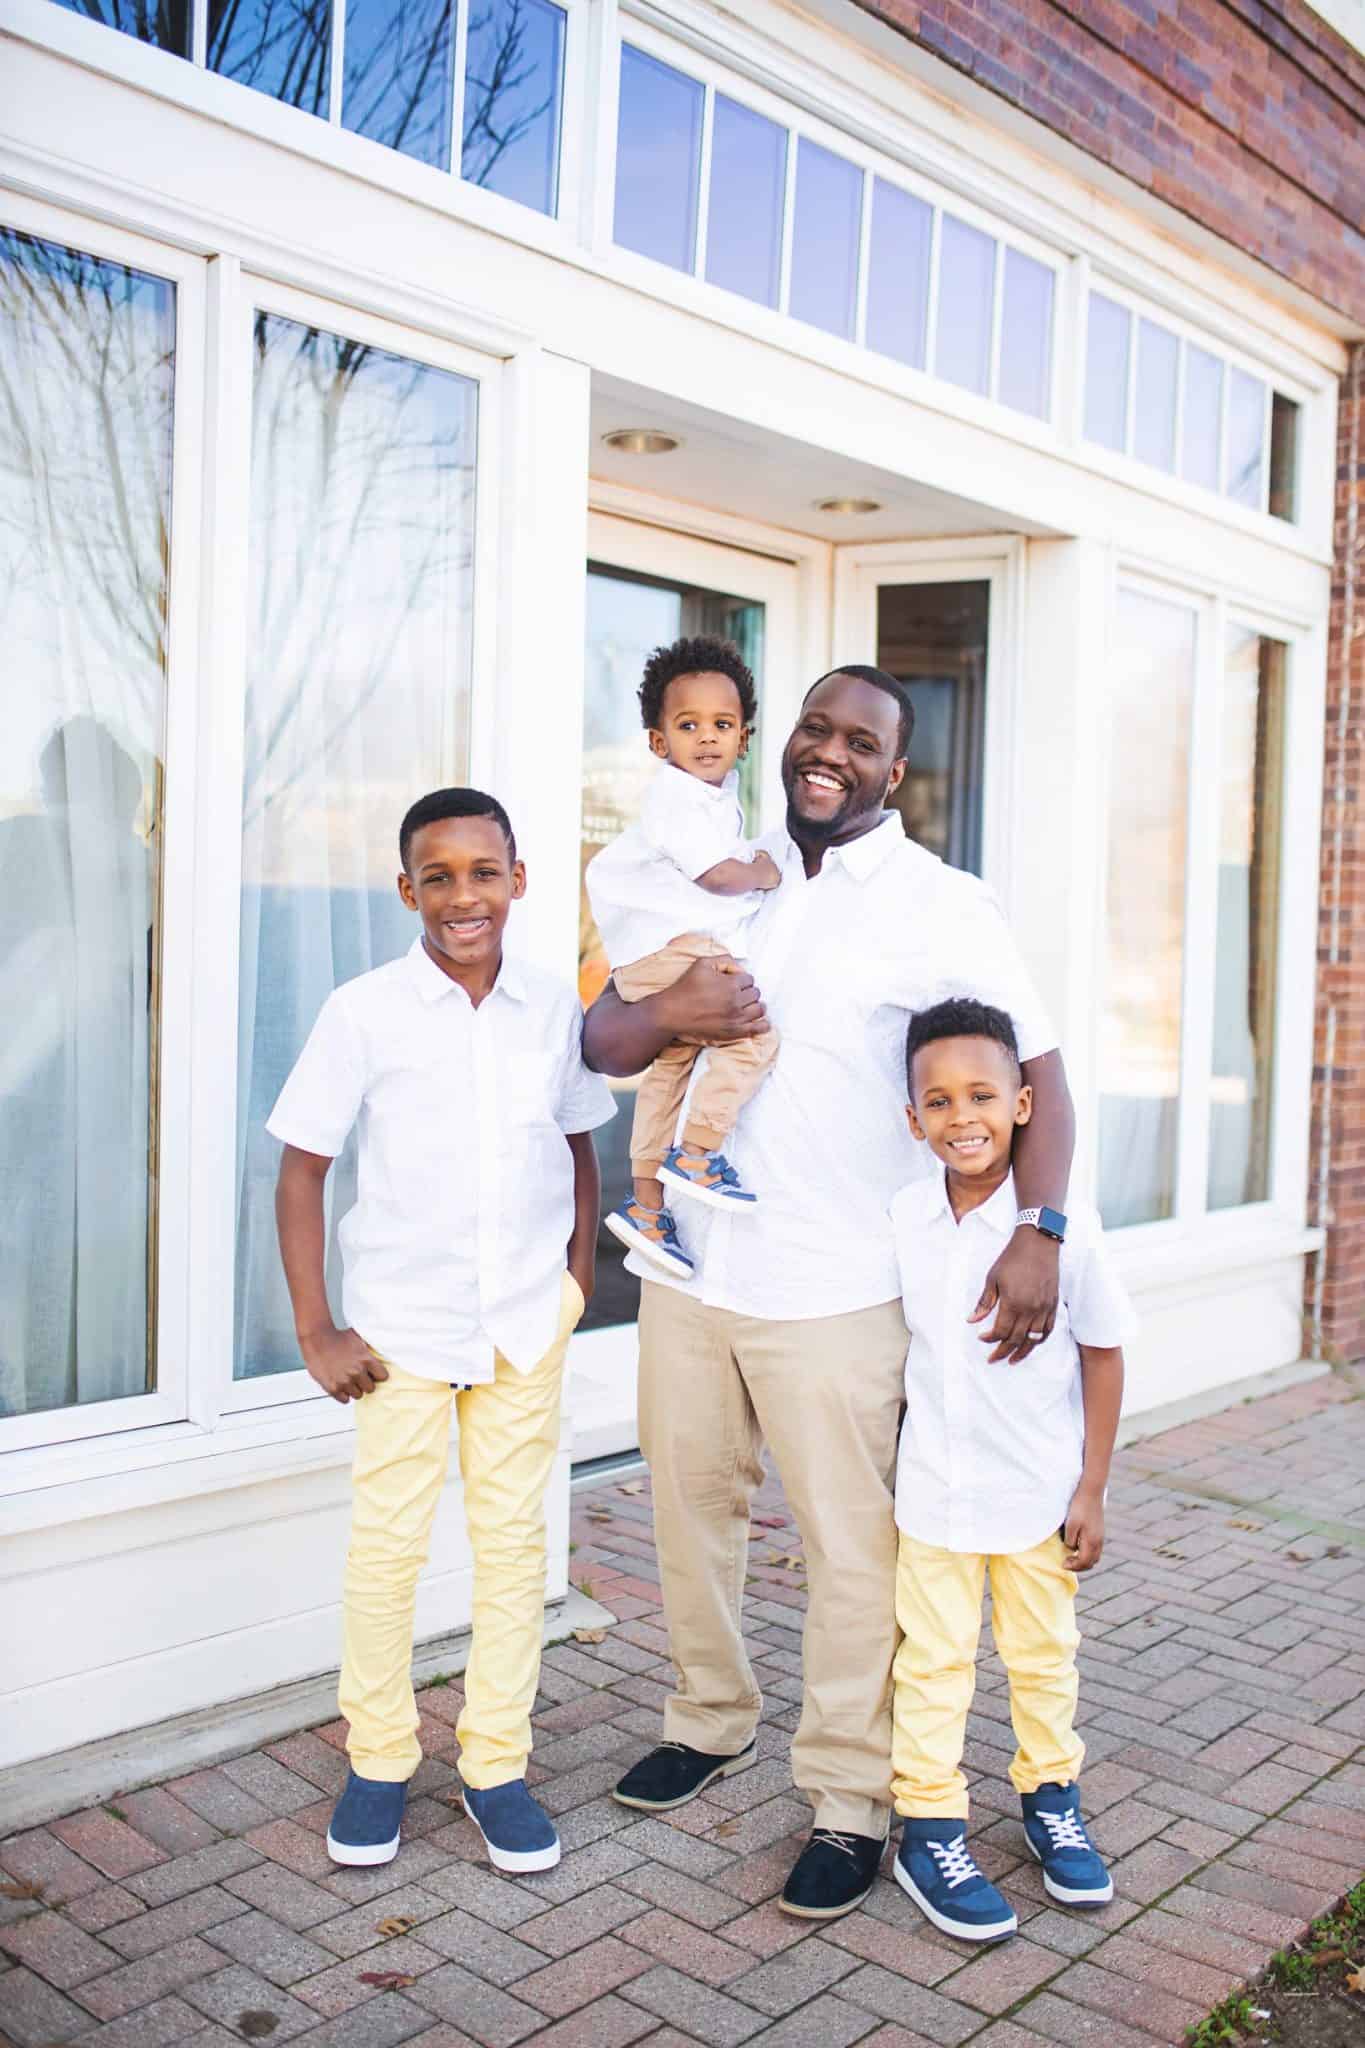 Matching Family Outfits for Spring by popular Dallas fashion blog, Glamorous Versatility: image of a family standing together outside and wearing The Children's Place Baby And Toddler Boys Dad And Me Print Poplin Matching Button Down Shirt, and The Children's Place Baby And Toddler Boys Belted Matching Chino Pants.